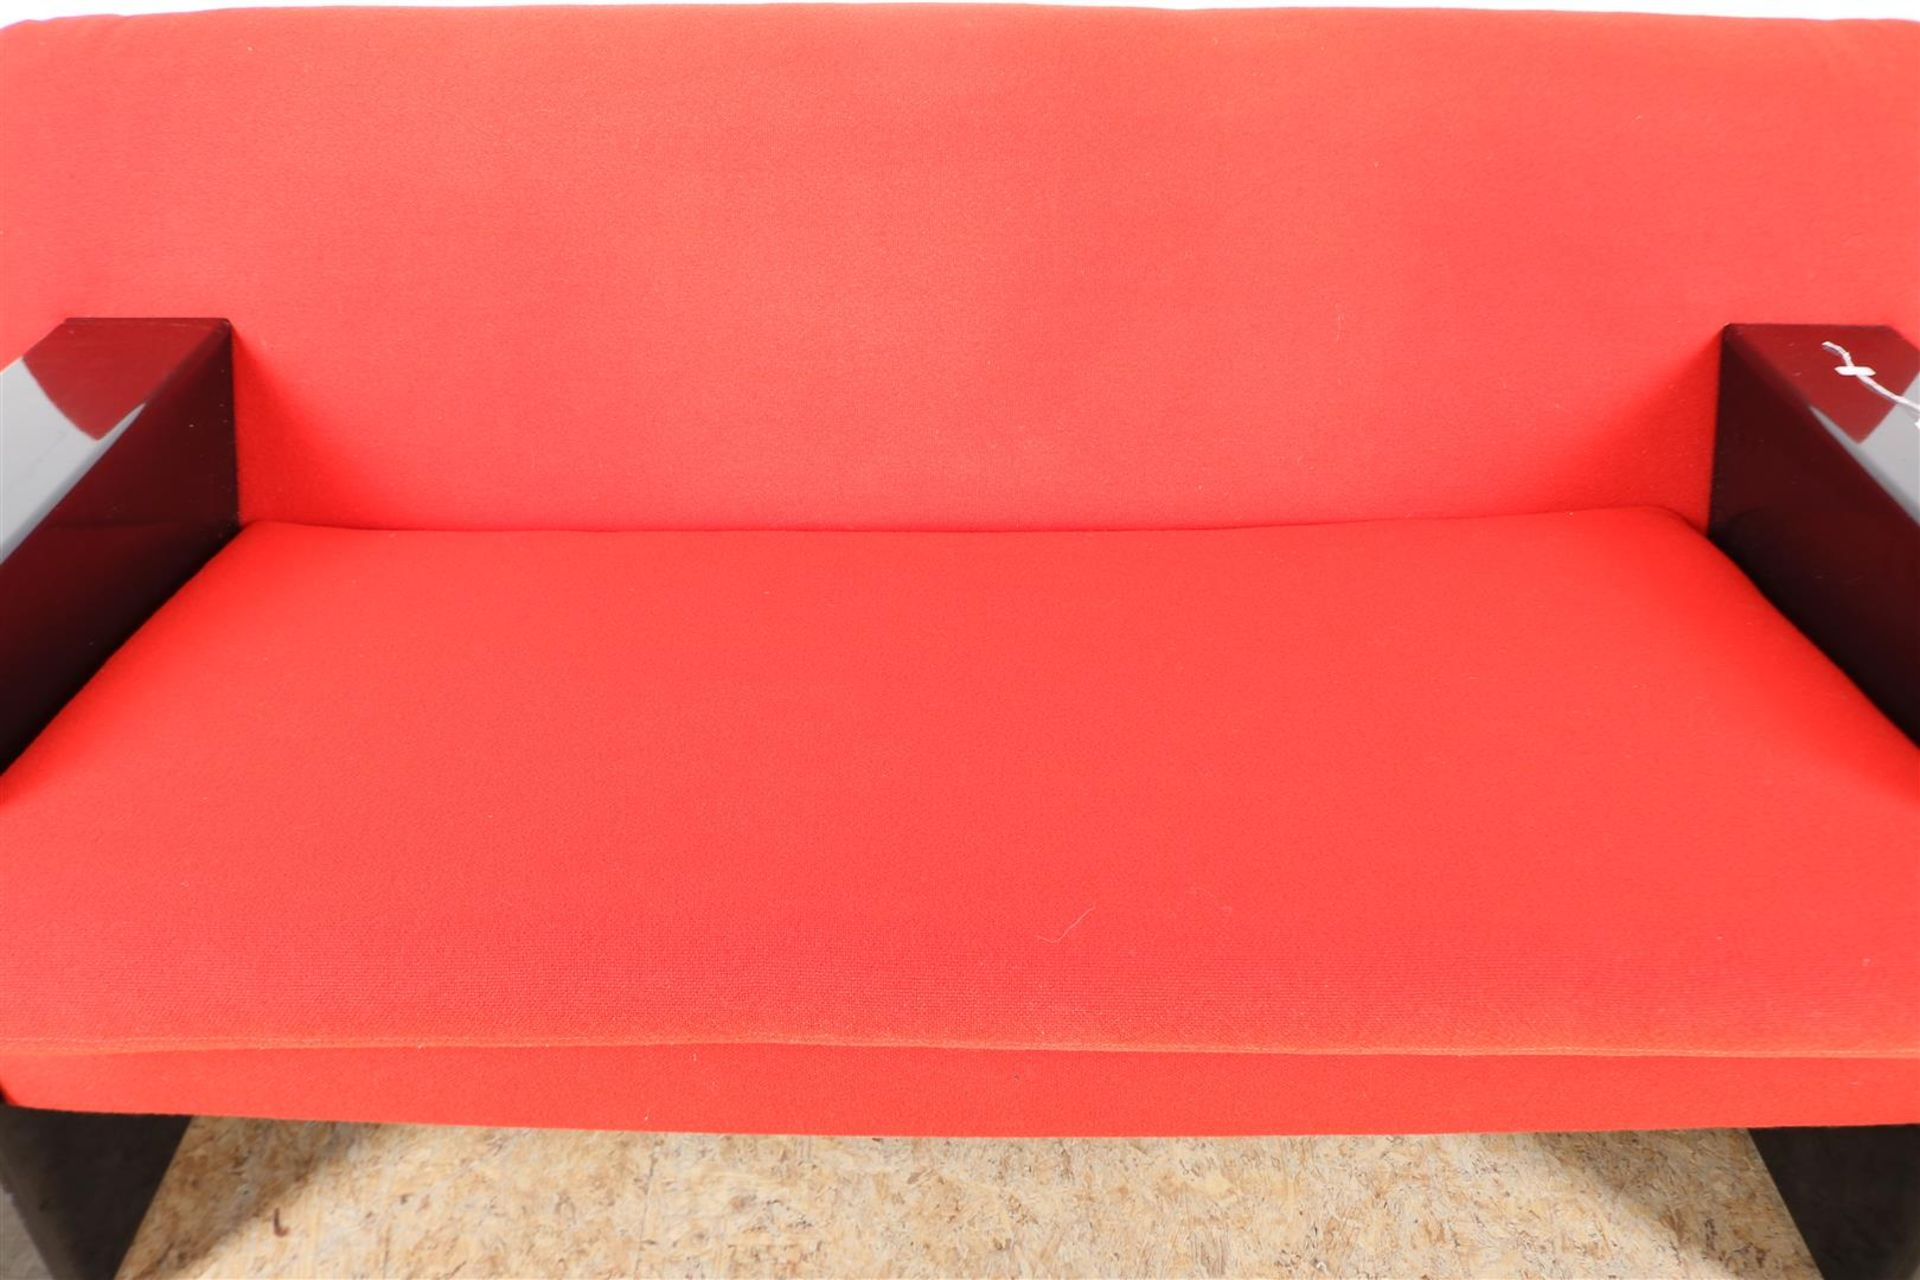 Two-seater sofa with red fabric upholstery and black wooden base, model “Sandwich” (model 750), - Image 2 of 4